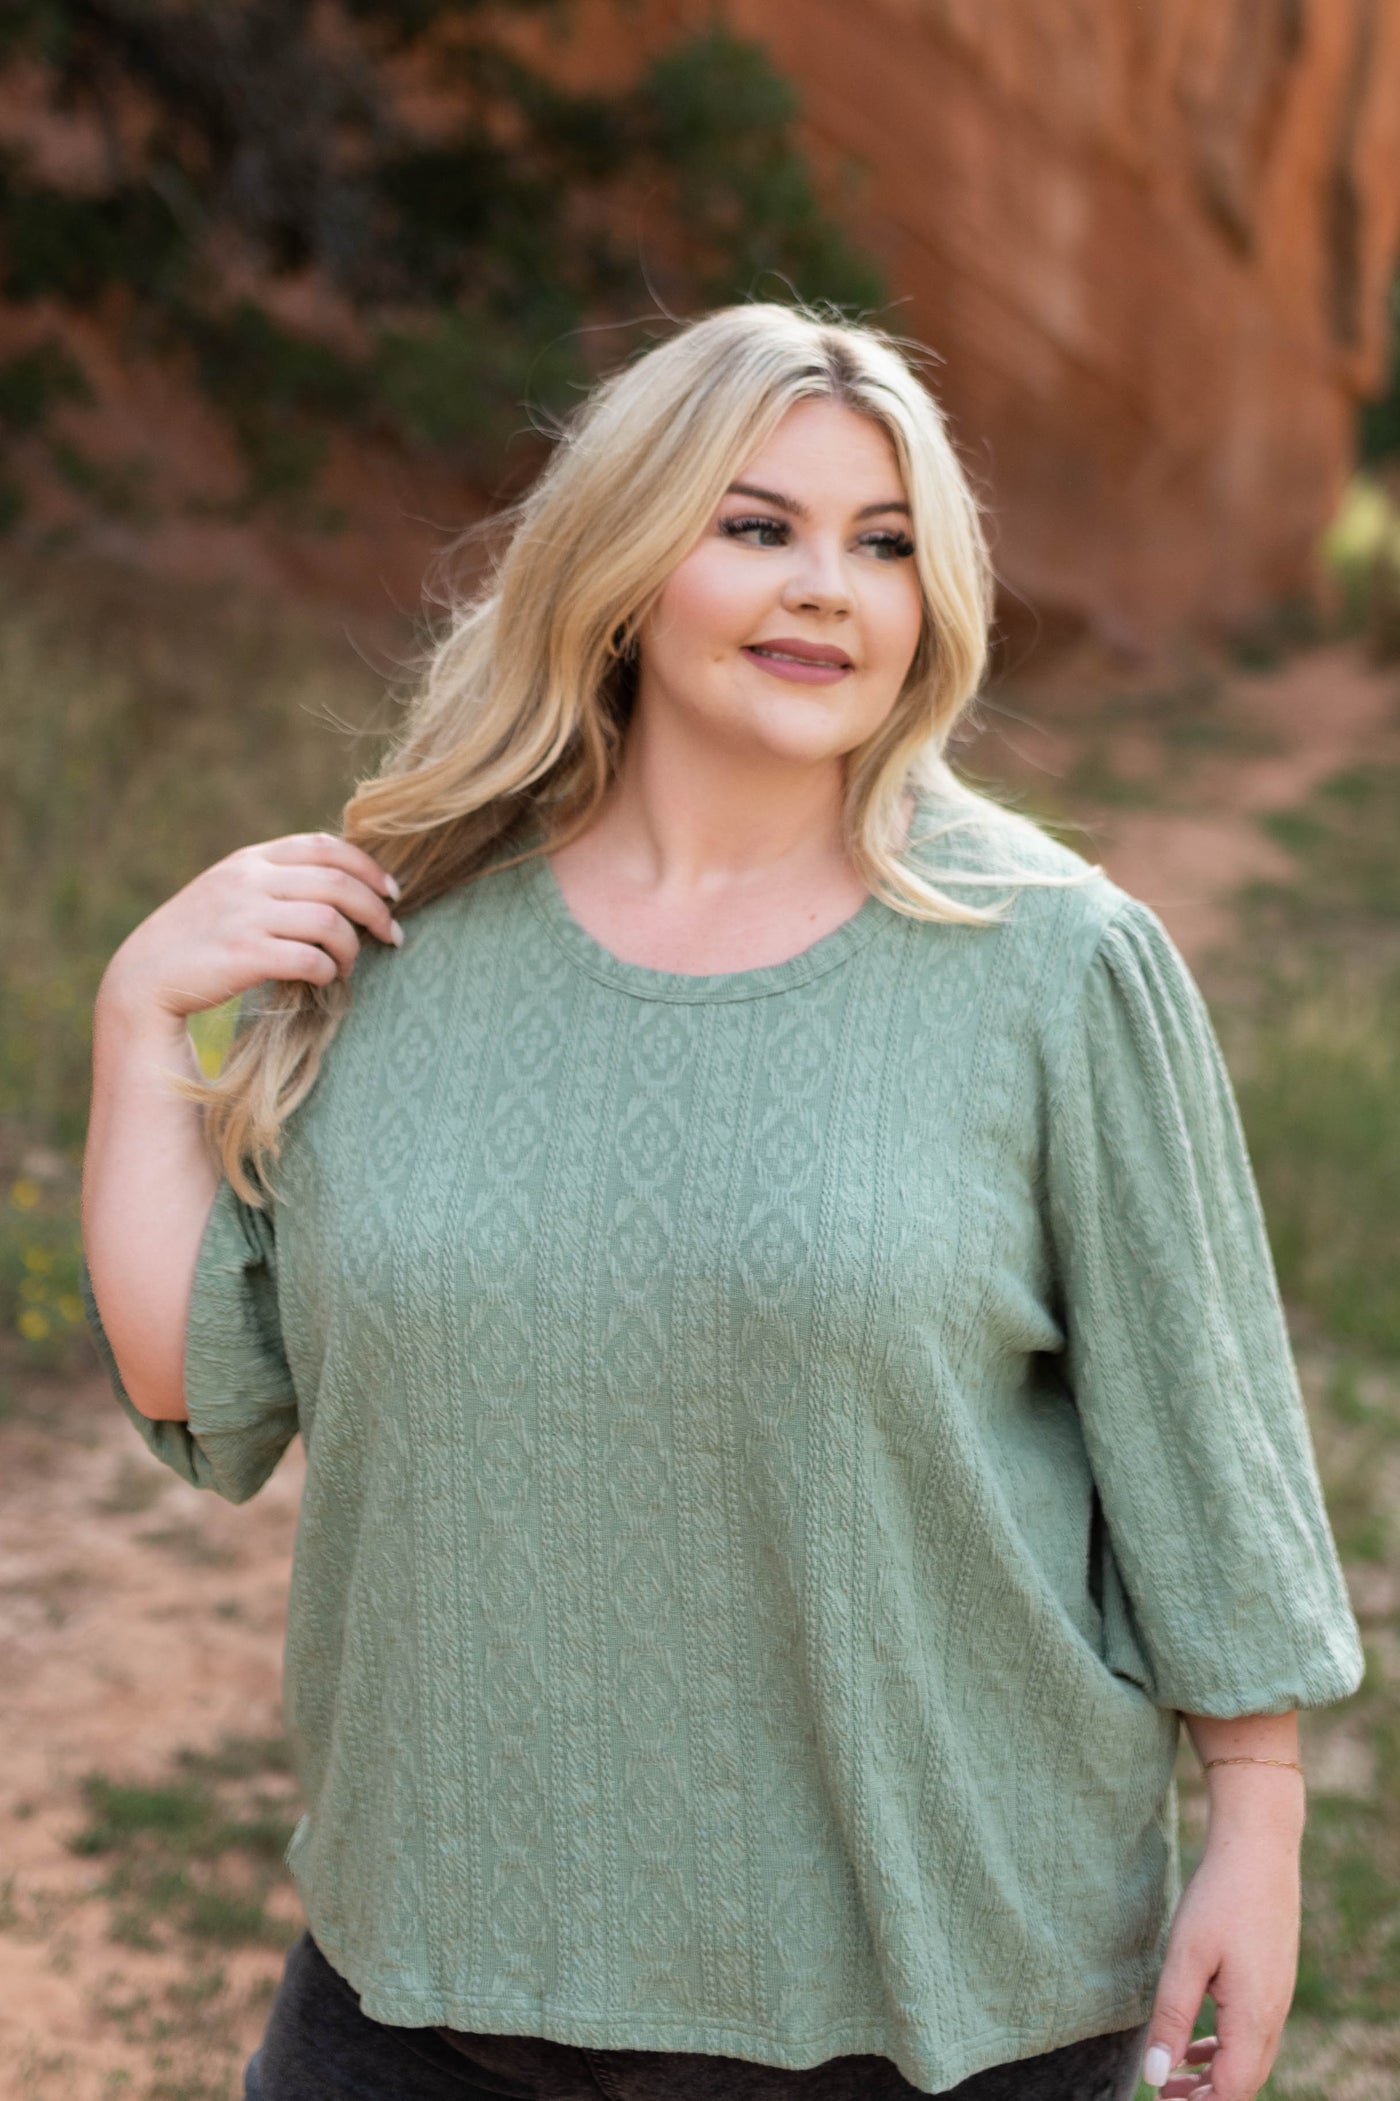 Plus size sage top with 3/4 sleeves and pattern in the fabric